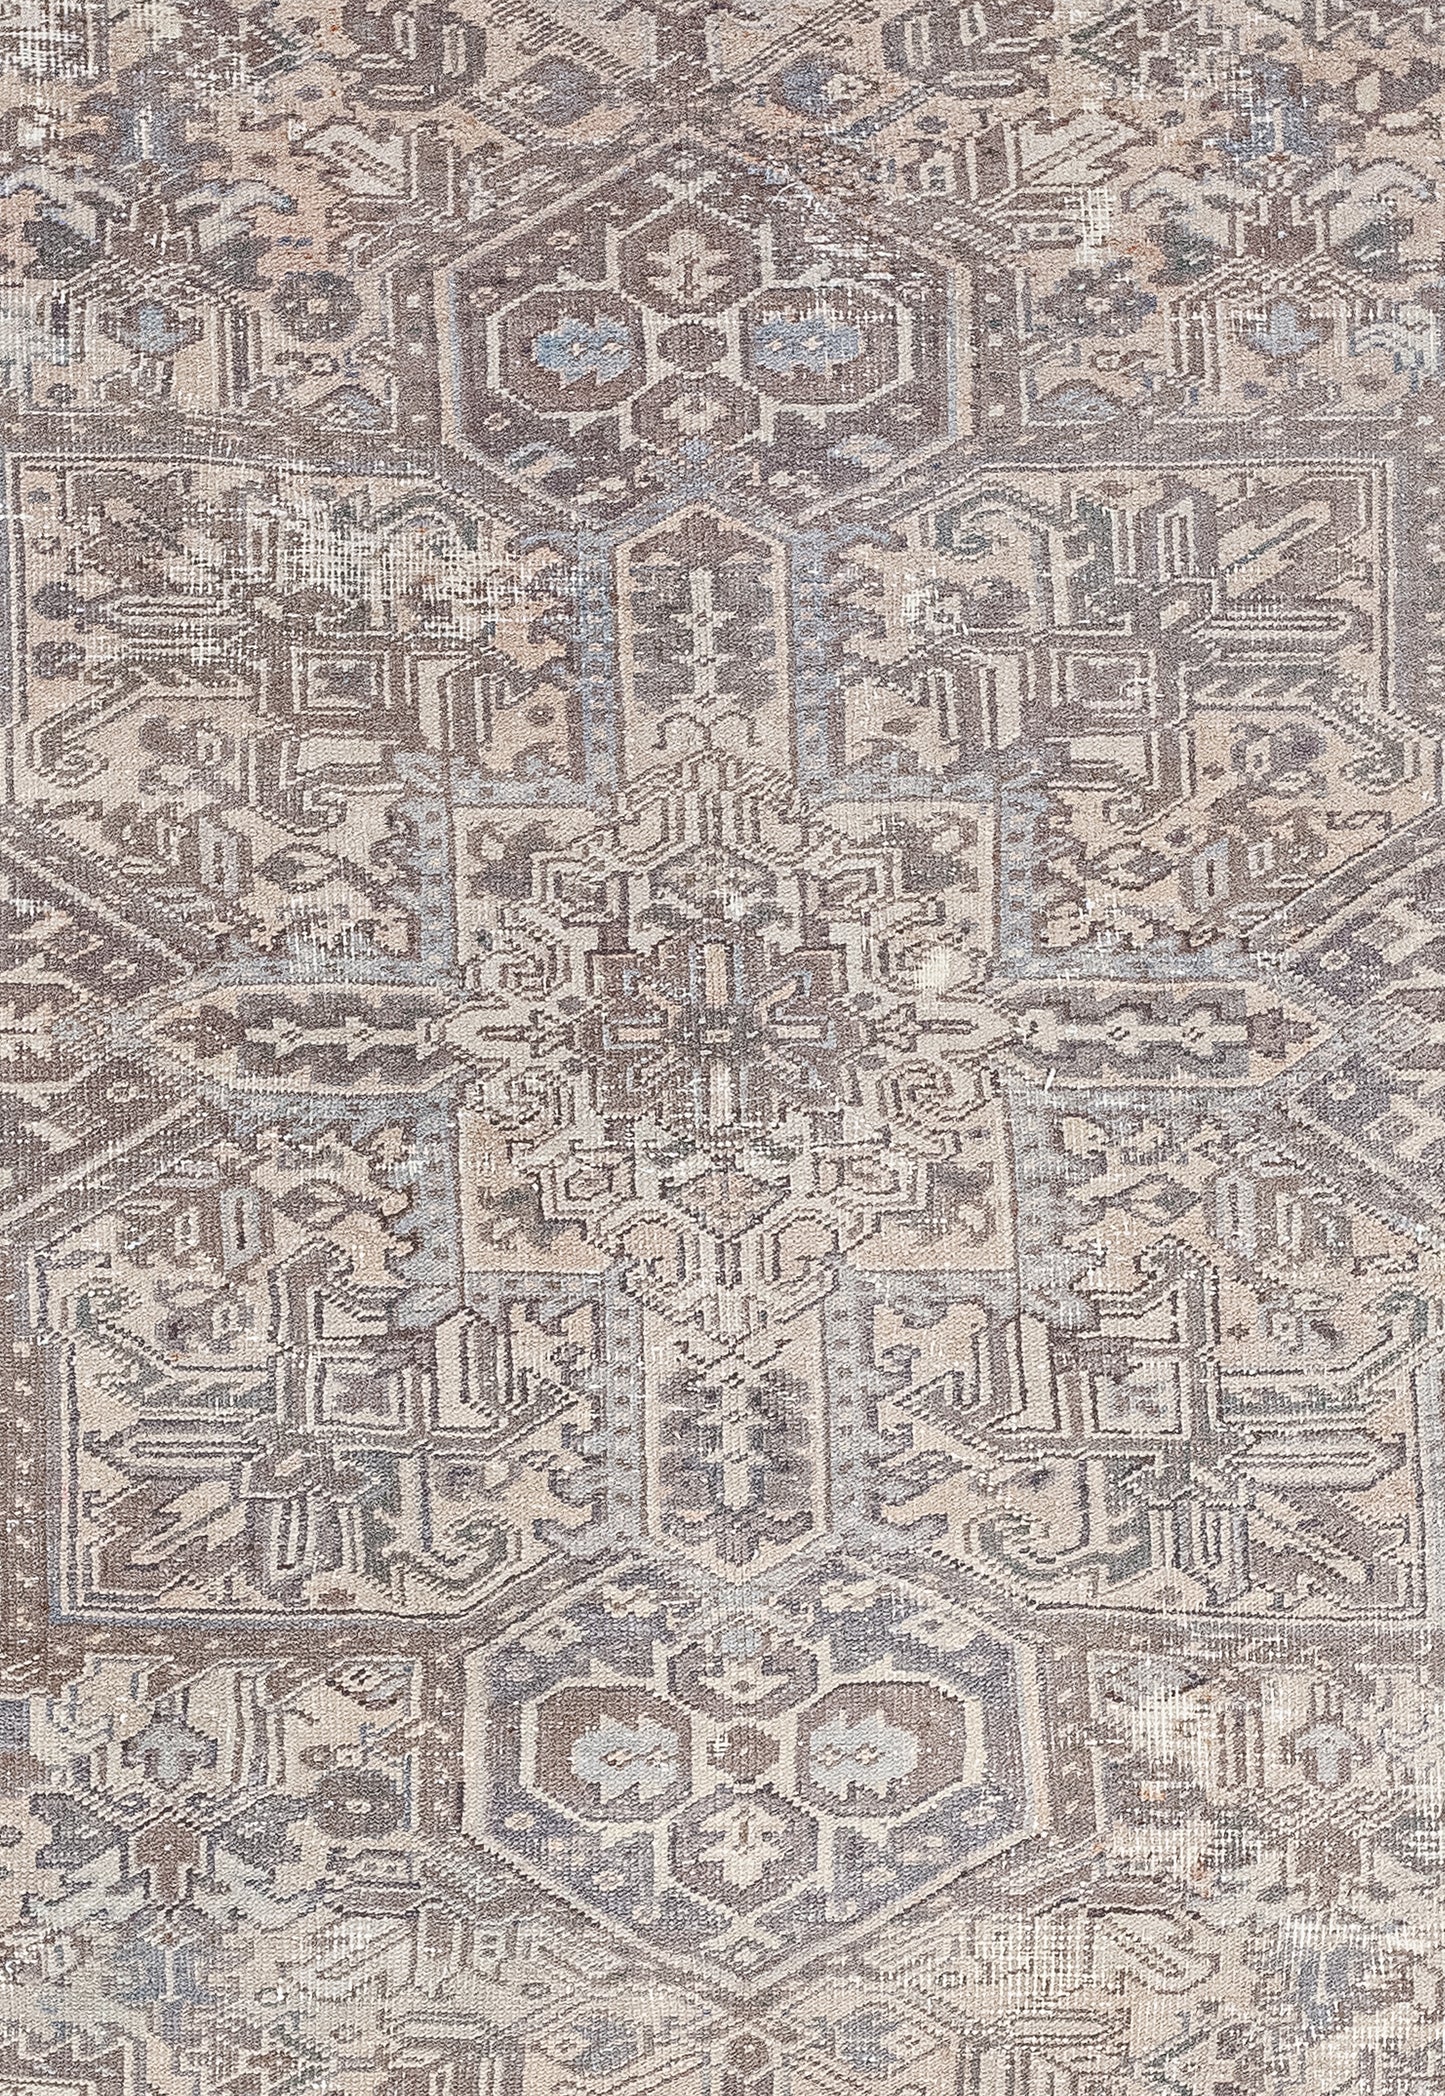 The center of the rug features a square cross that is made up of many tribal symbols that are also found throughout the rug.